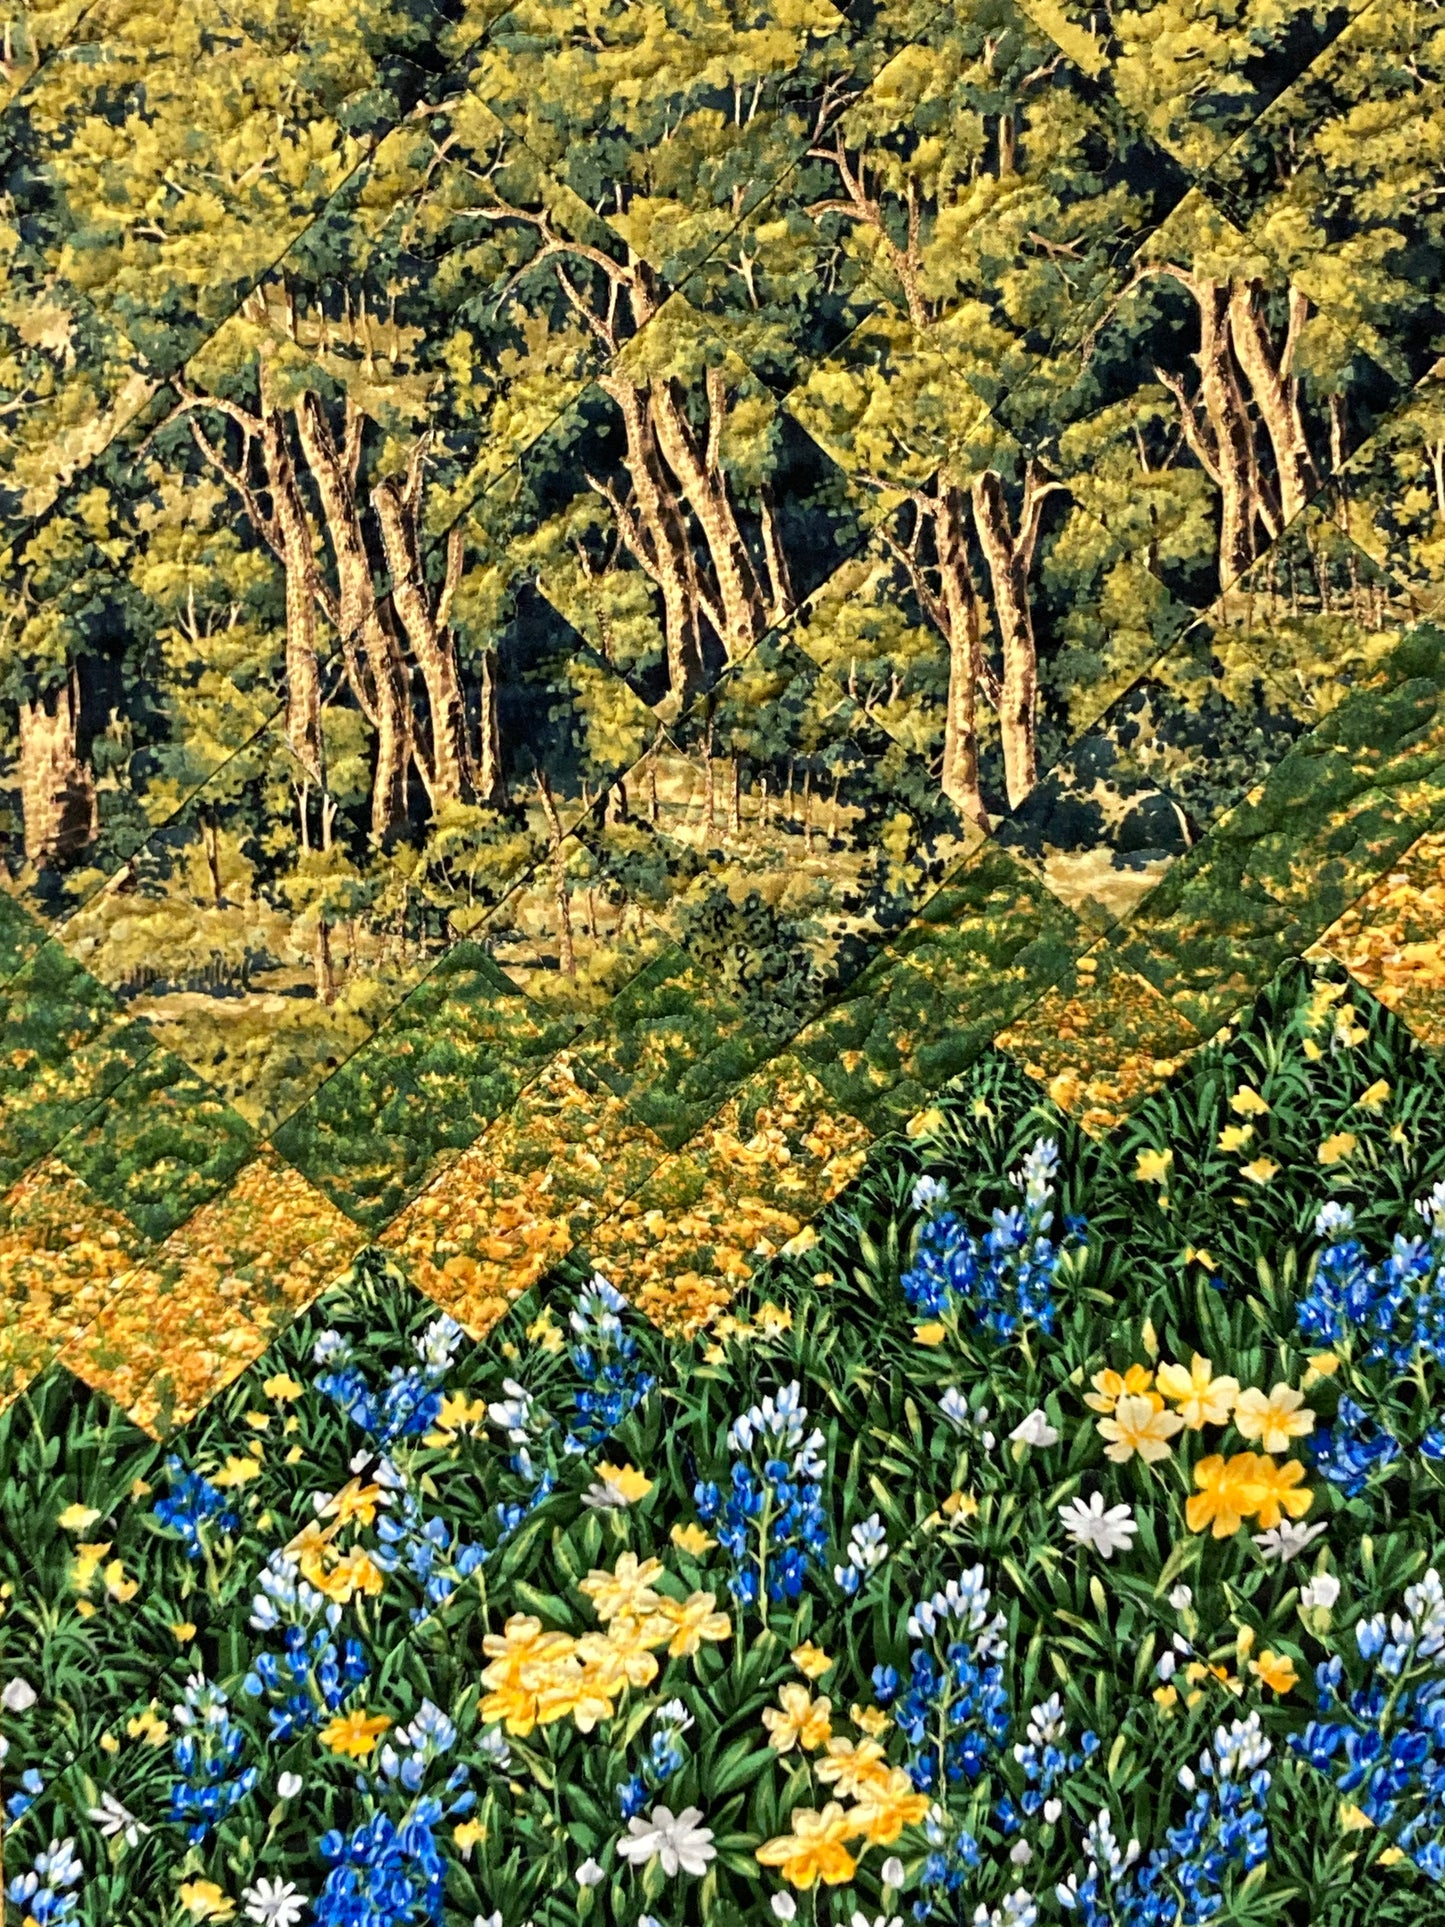 Art Quilt, Blue and Yellow Flower, Forest Fabric Wall Hanging Quilted Wall Art Tree Landscape Quilt Impressionistic 23x42" Handmade Original Artwork Tapestry